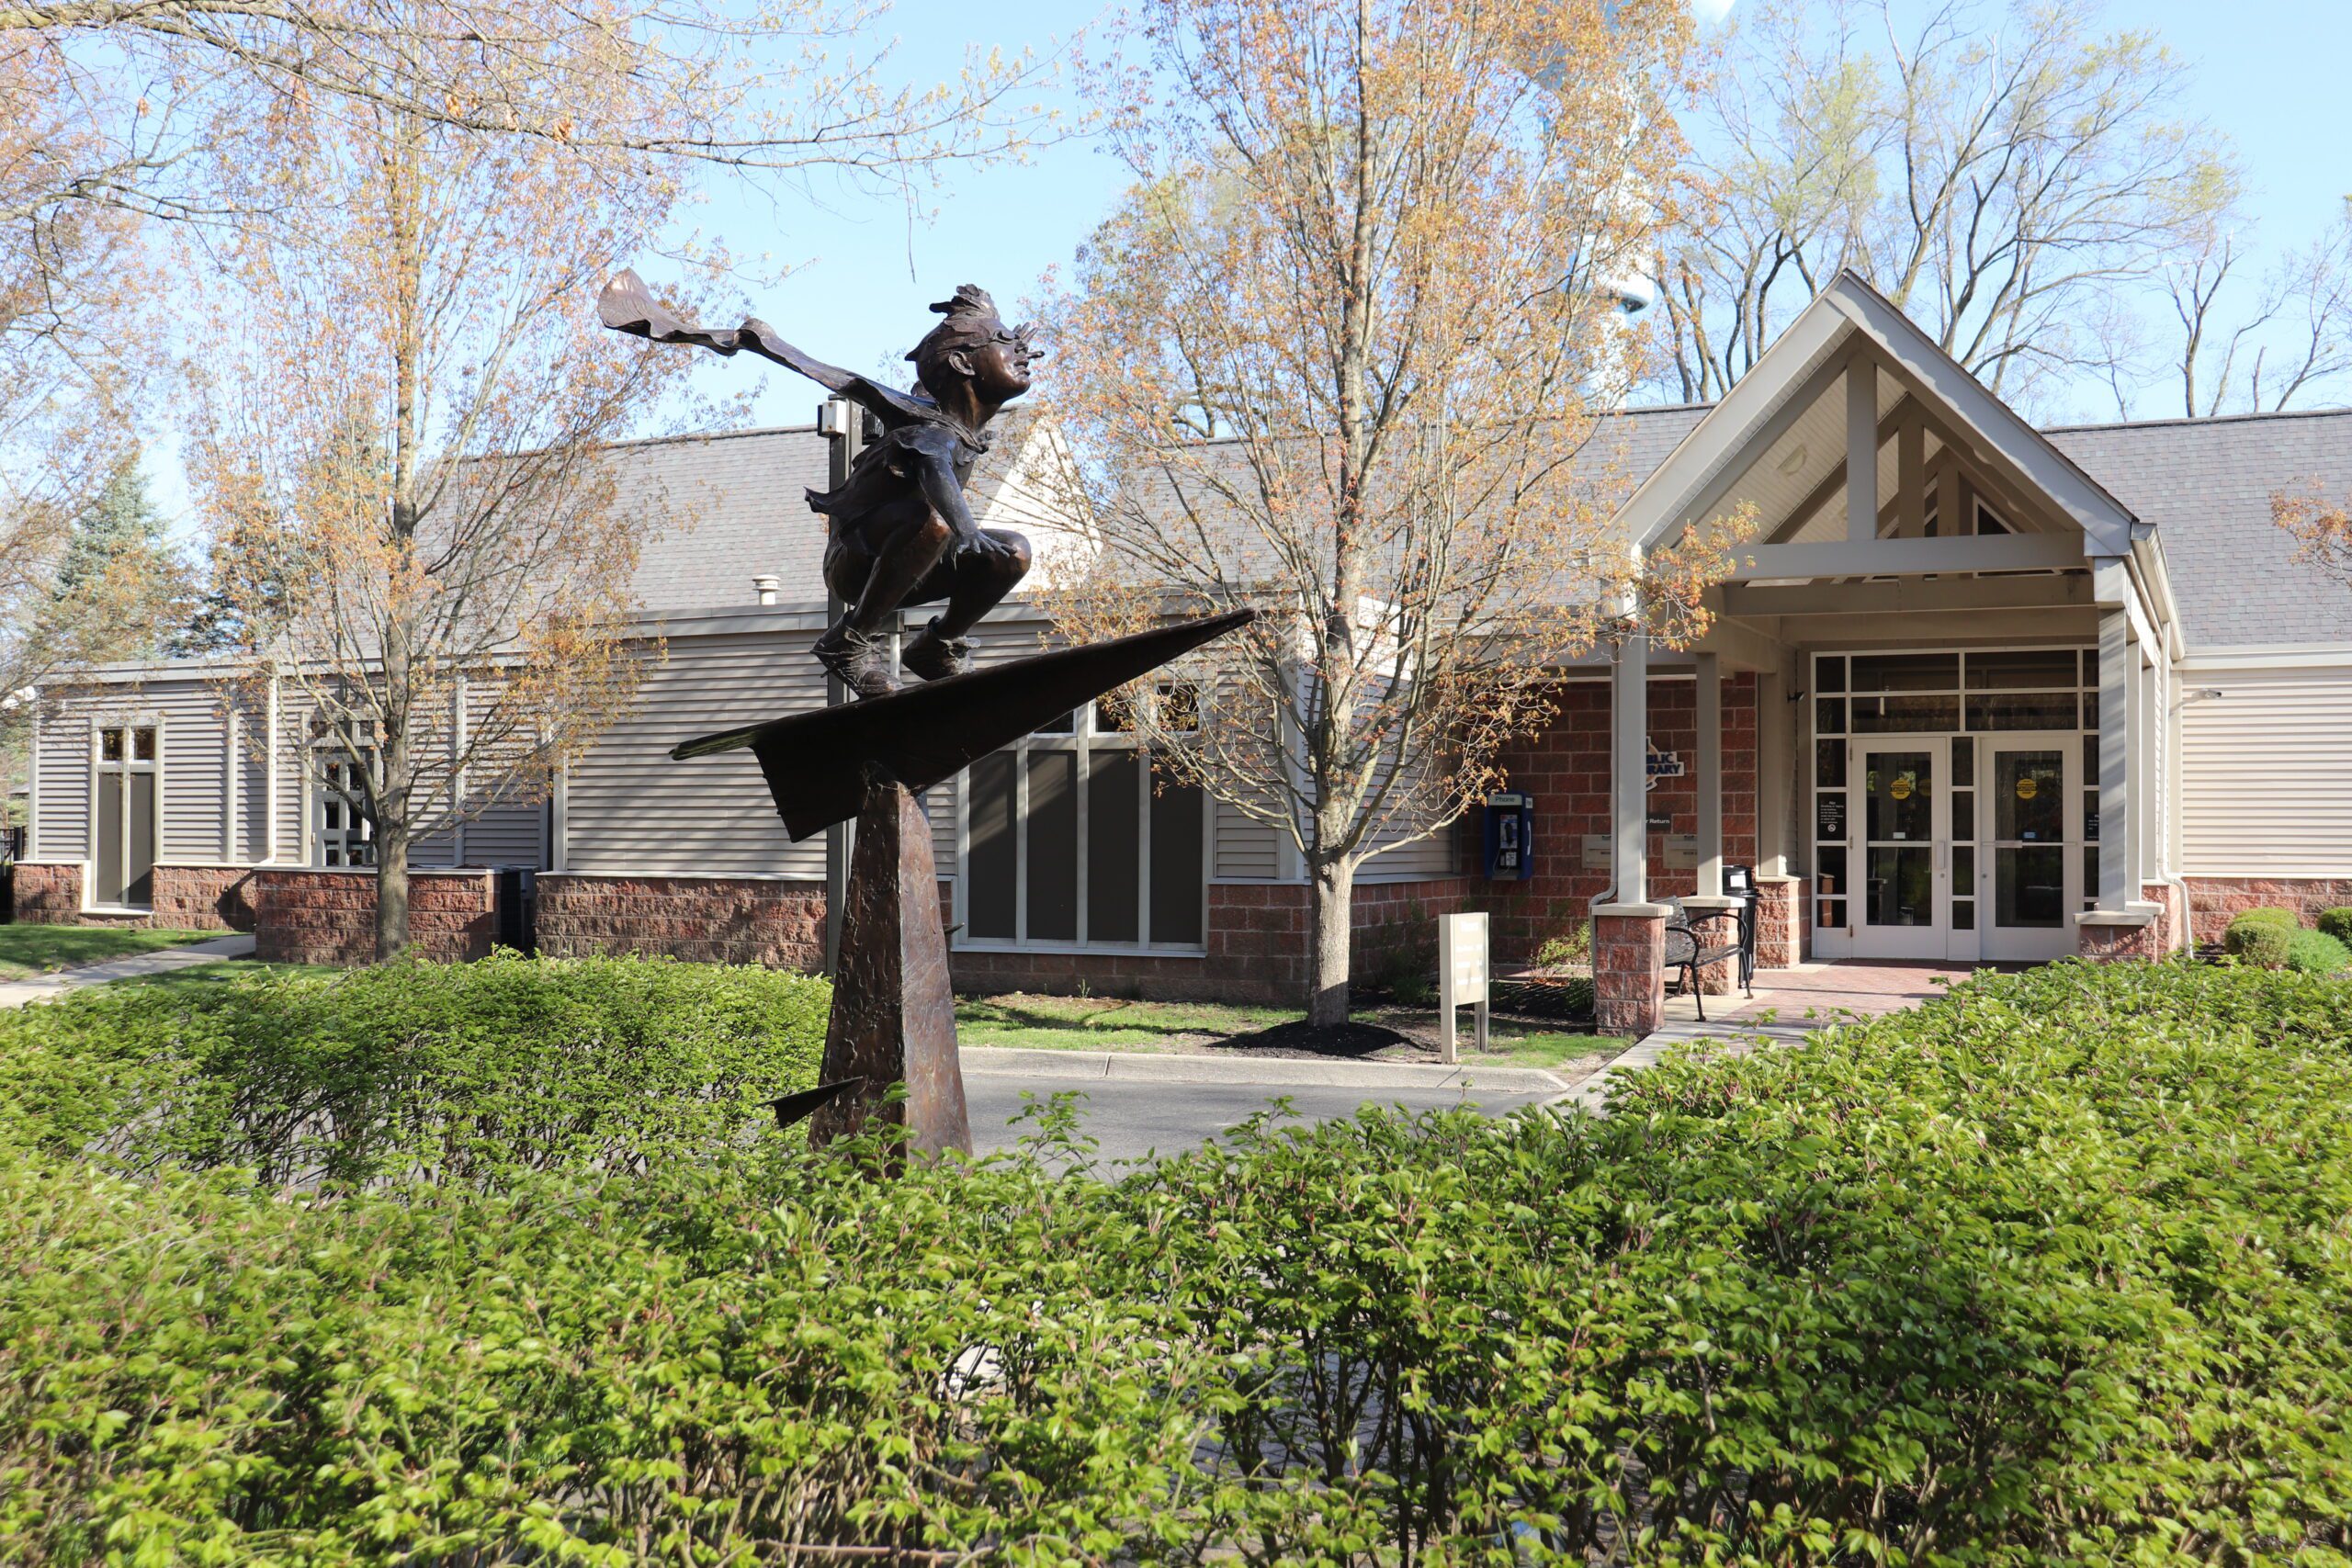 Entry of the Westacres Branch across from a bronze statue of a boy riding on a paper airplane